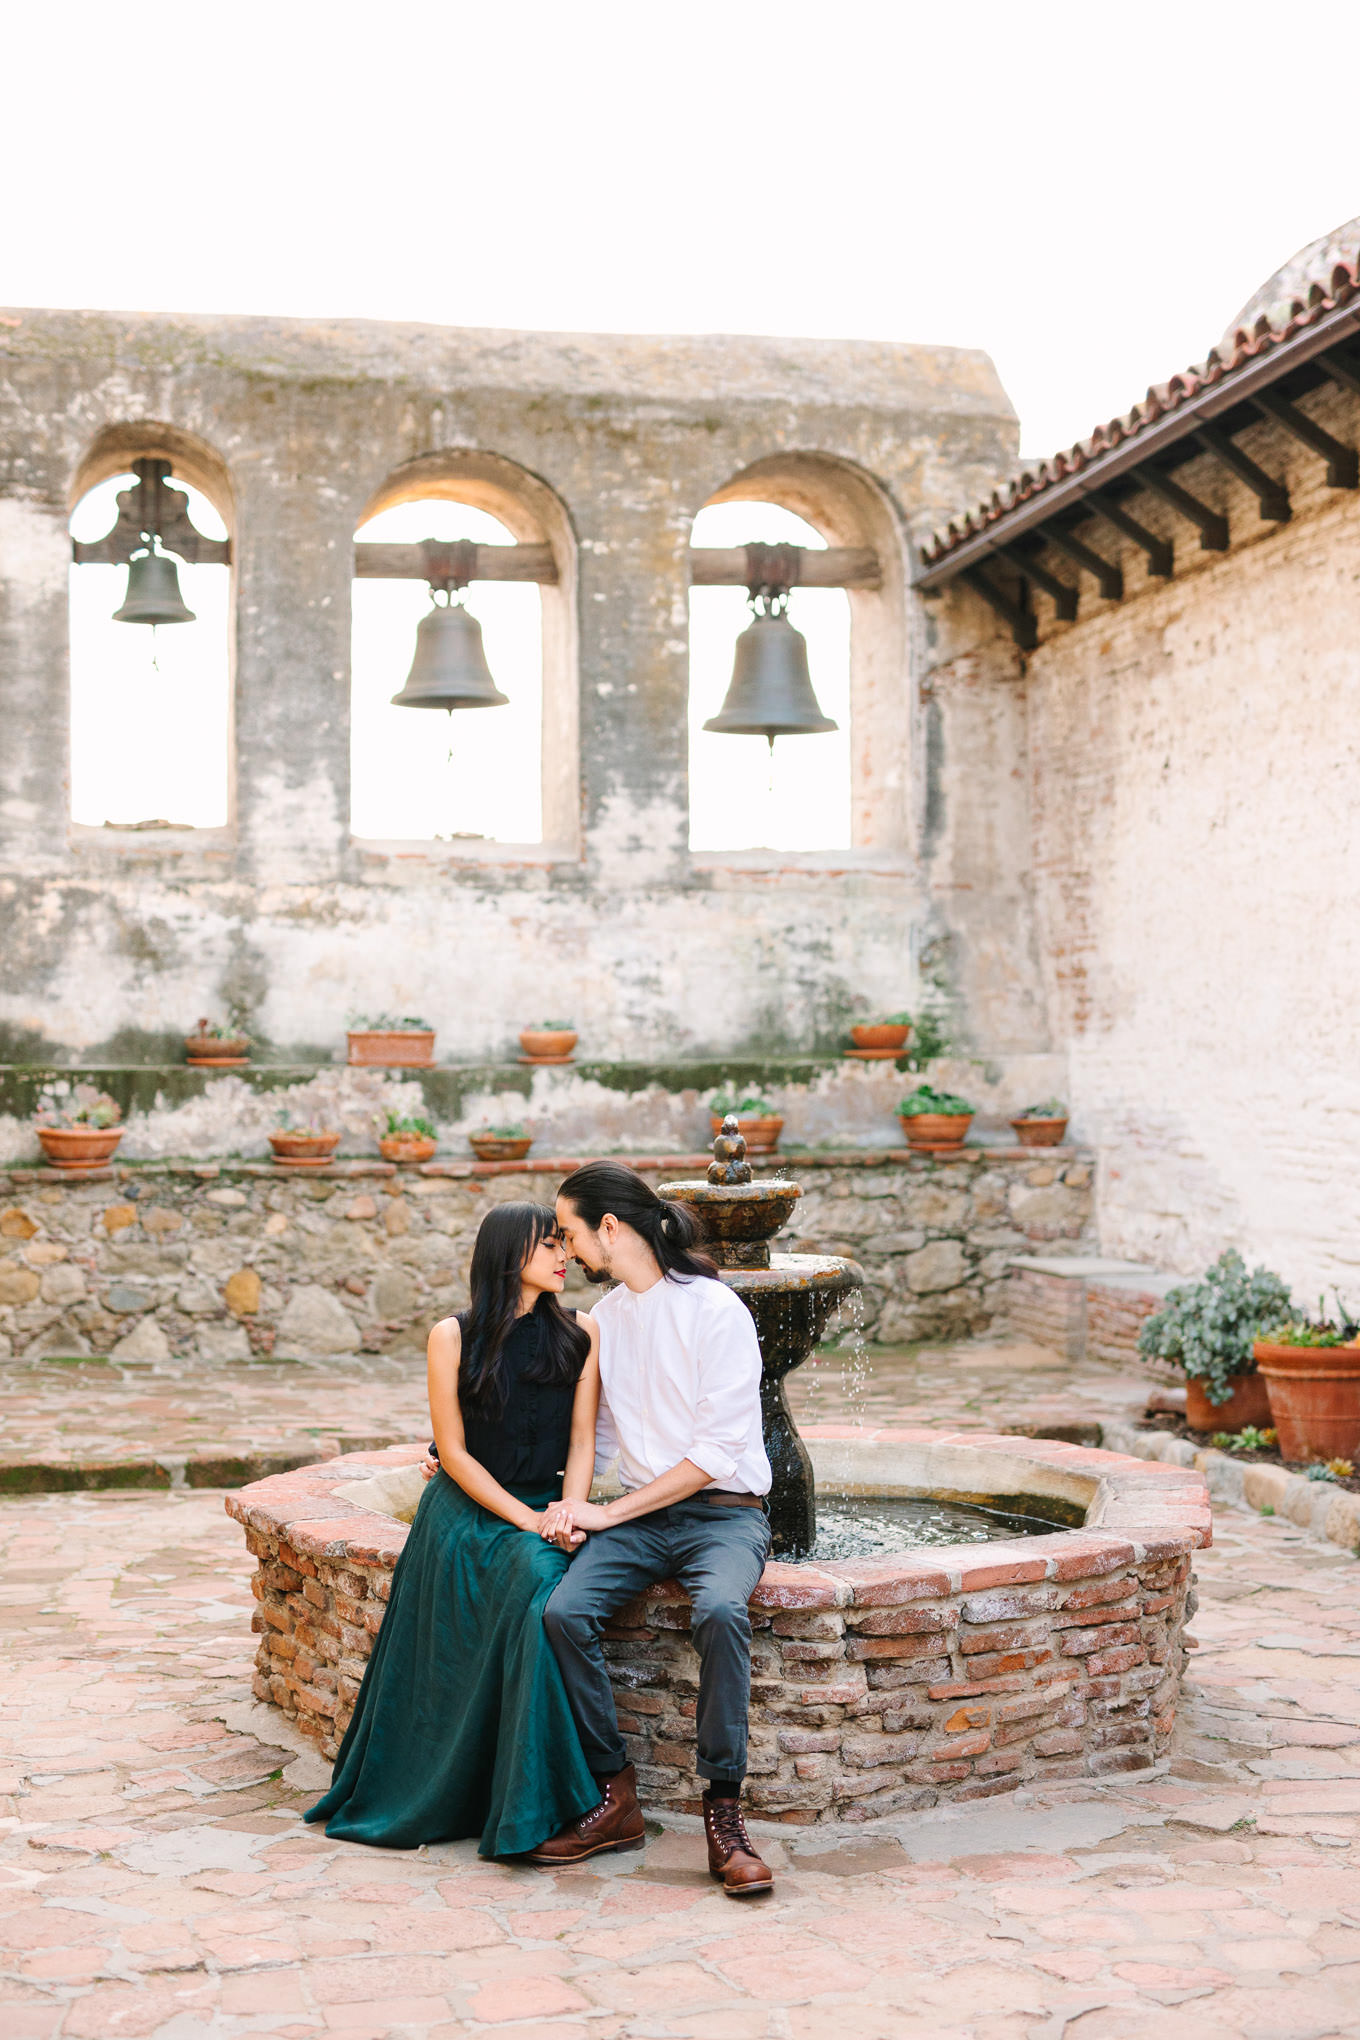 Mission San Juan Capistrano engagement session | Wedding and elopement photography roundup | Los Angeles and Palm Springs photographer | #losangeleswedding #palmspringswedding #elopementphotographer Source: Mary Costa Photography | Los Angeles